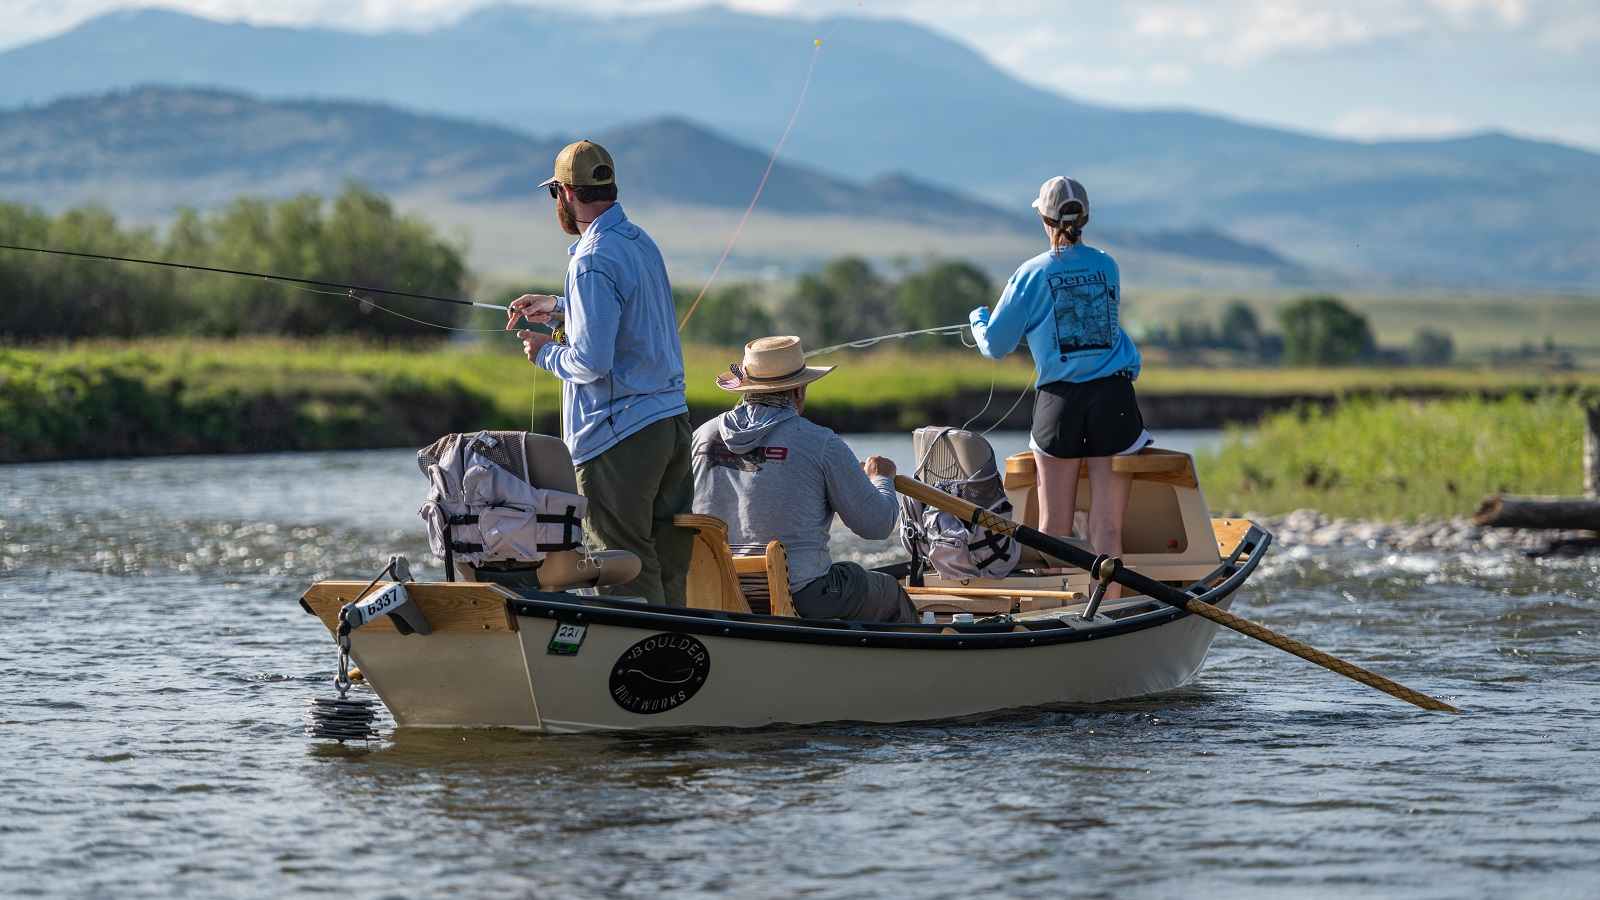 Two people stand in a boat while fly fishing in a Montana river as a guide steers during a trip with The Tackle Shop.